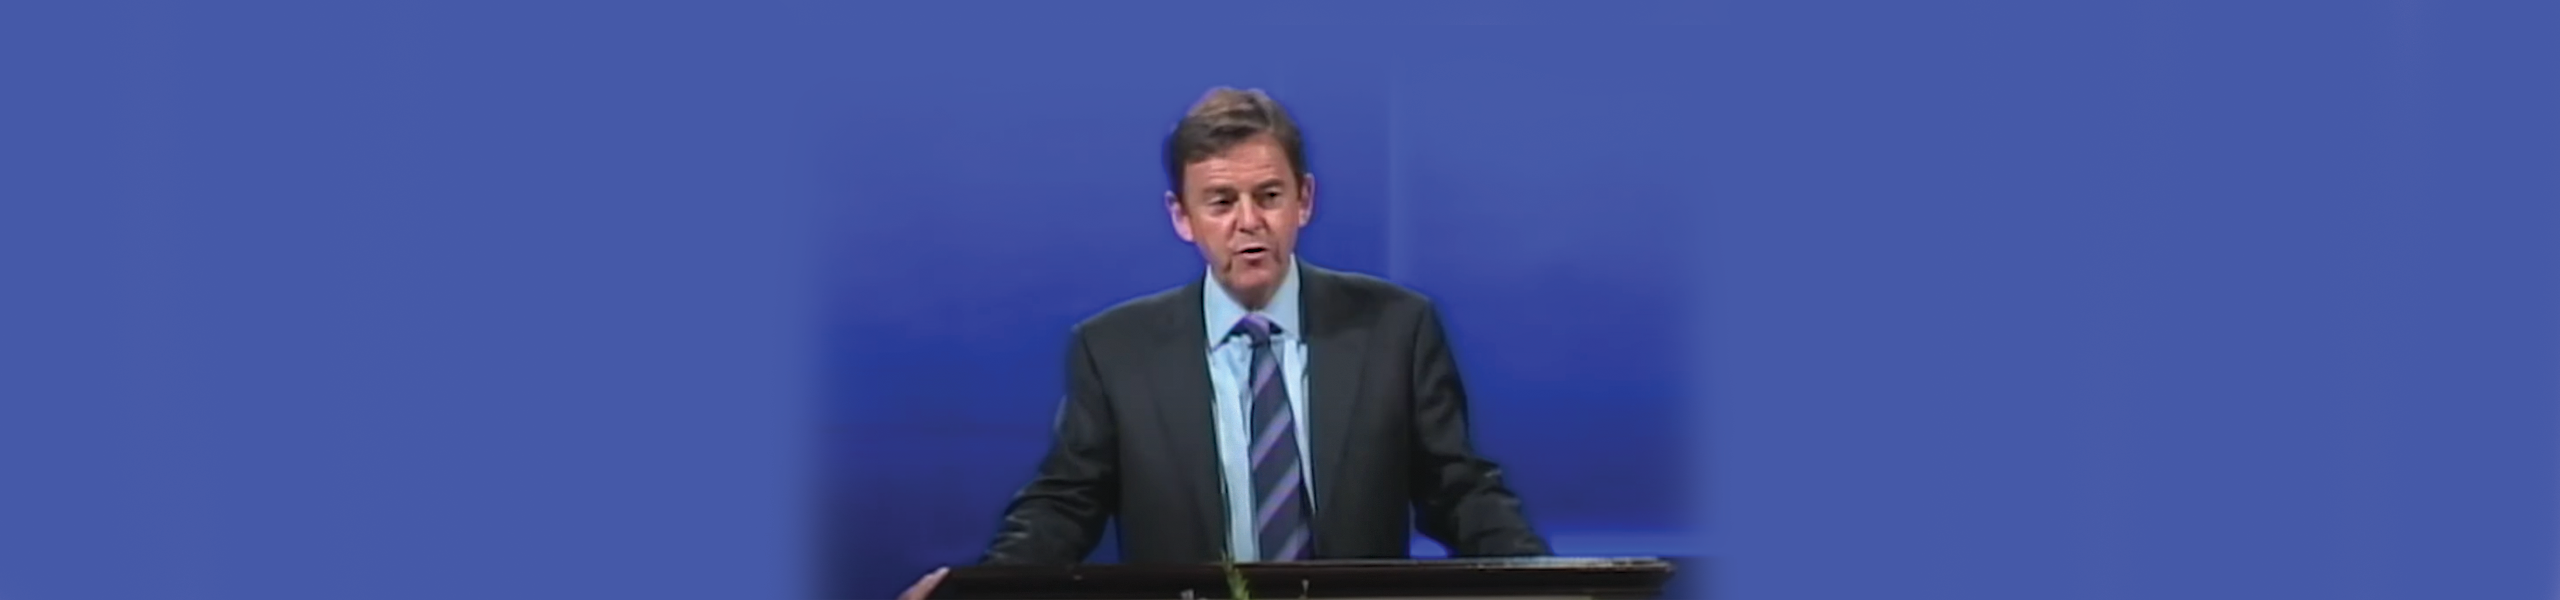 Stories of the Kingdom | Alistair Begg